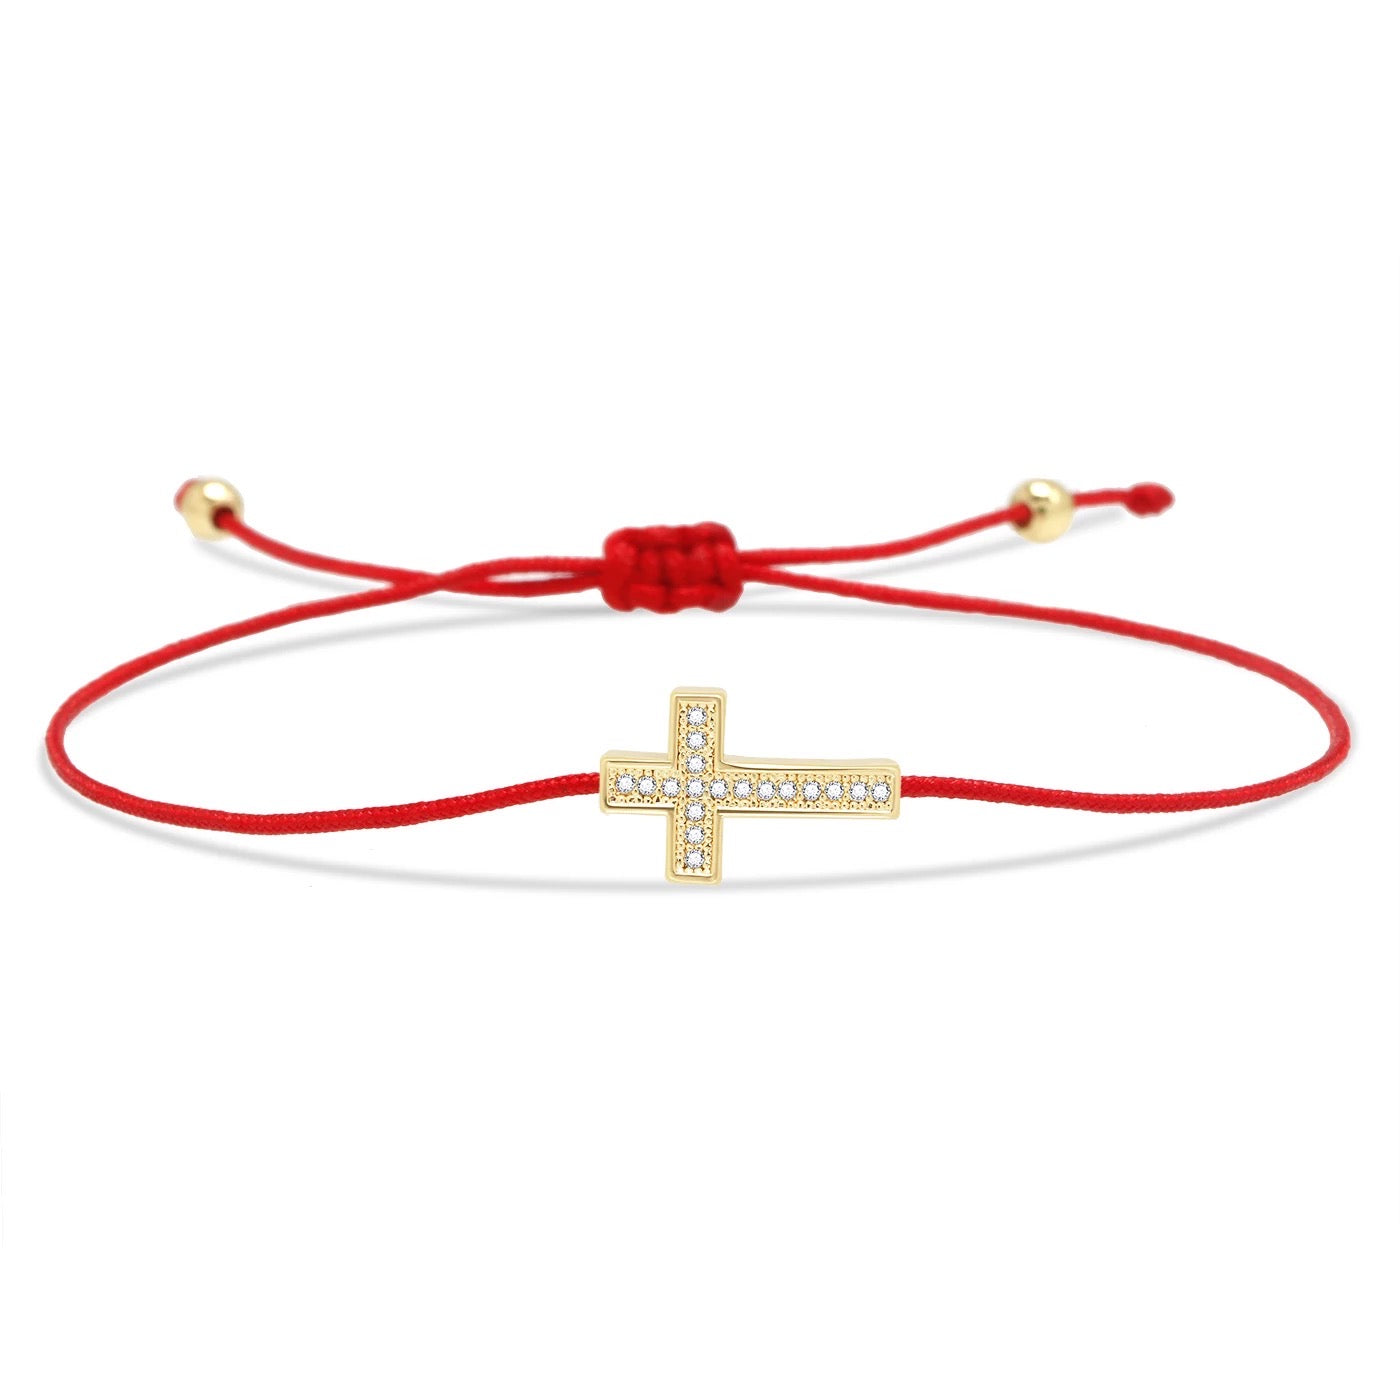 Gold Cross Charm Thin Red String Protection Bracelet - MY HARMONY TREE